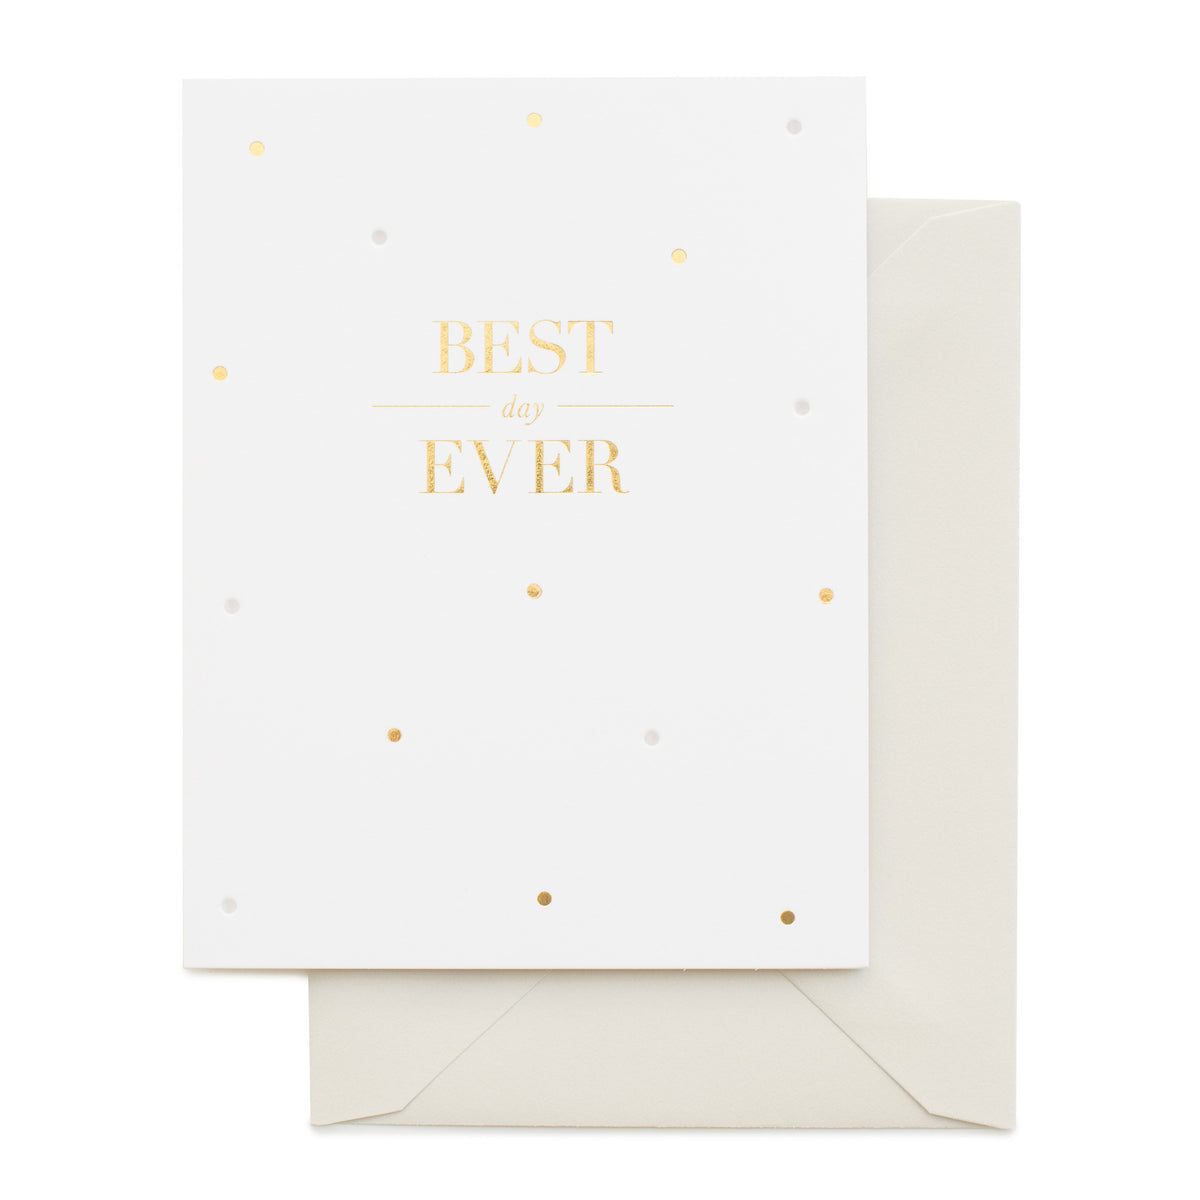 White greeting card printed in gold with "Best Day Ever" and a polka dot design paired with a grey envelope